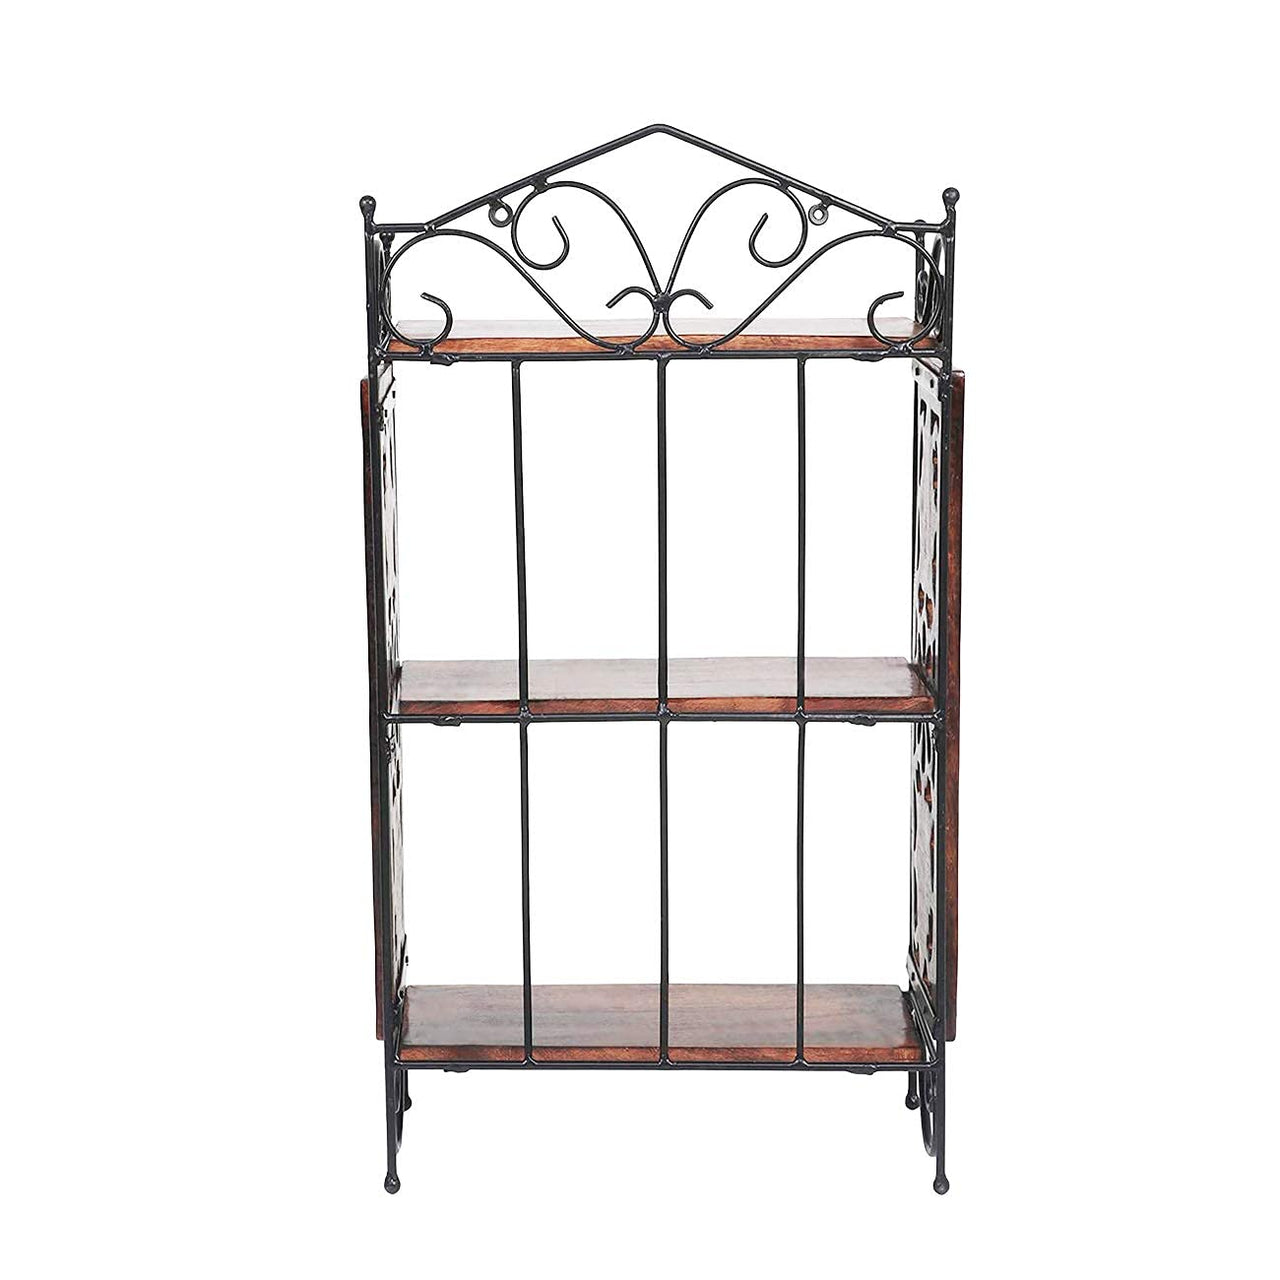 Wrought Iron & Wooden Cutlery Racks Foldable Spice Shelf Rack Kitchen Bathroom Counter top Storage Holder Organizer (3 Tier, Large) Dime Store